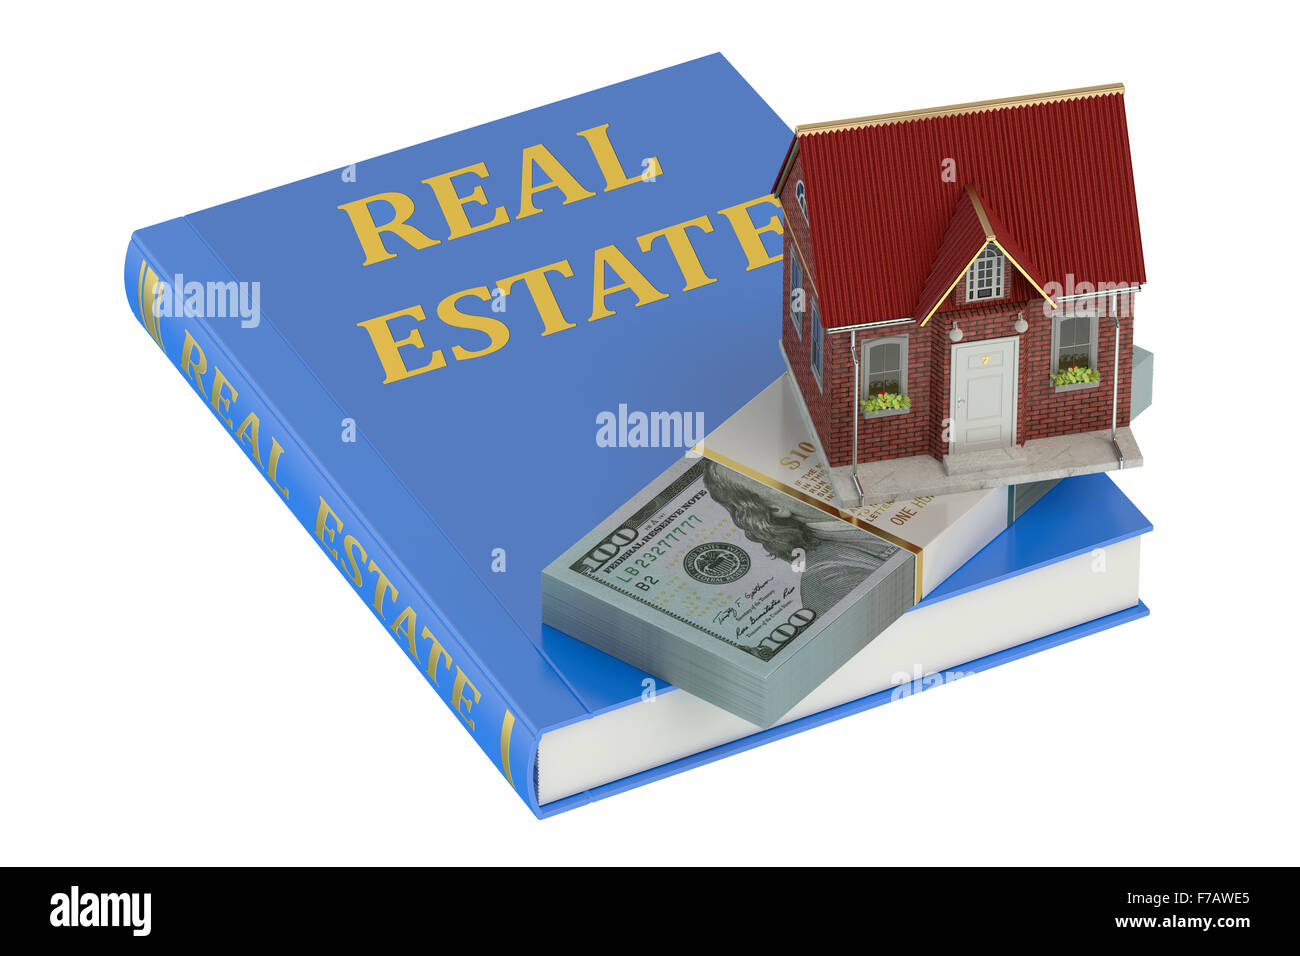 Real Estate concept isolated on white background Stock Photo